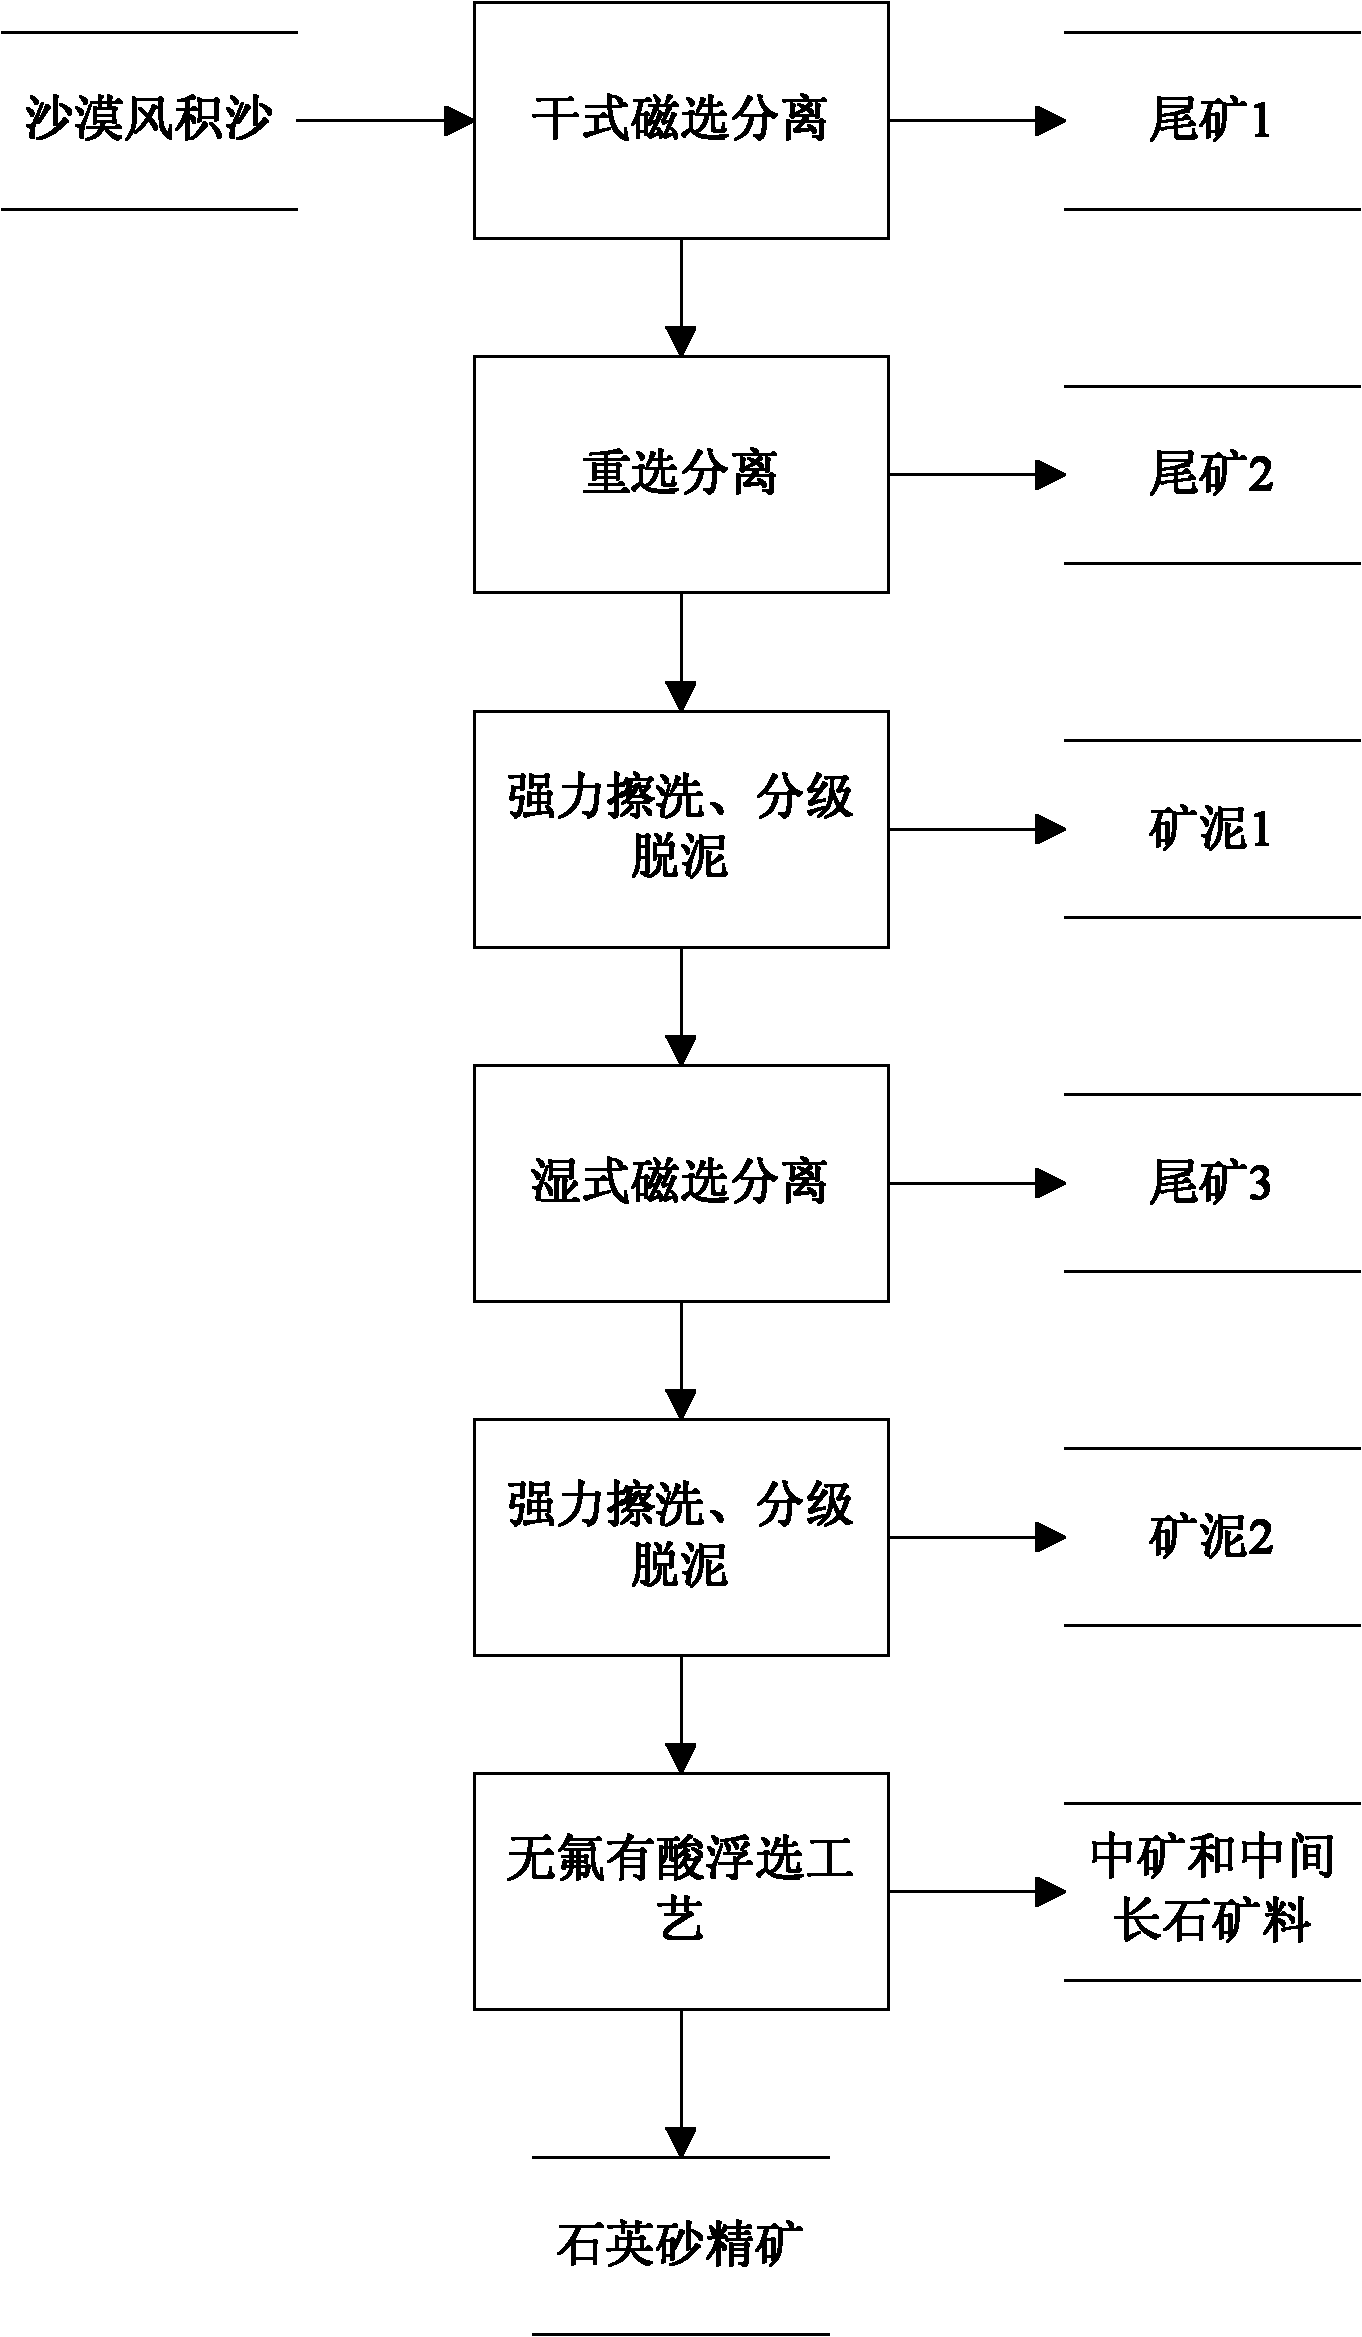 Method for separating and preparing quartz sand concentrate from wind-laid sand in desert